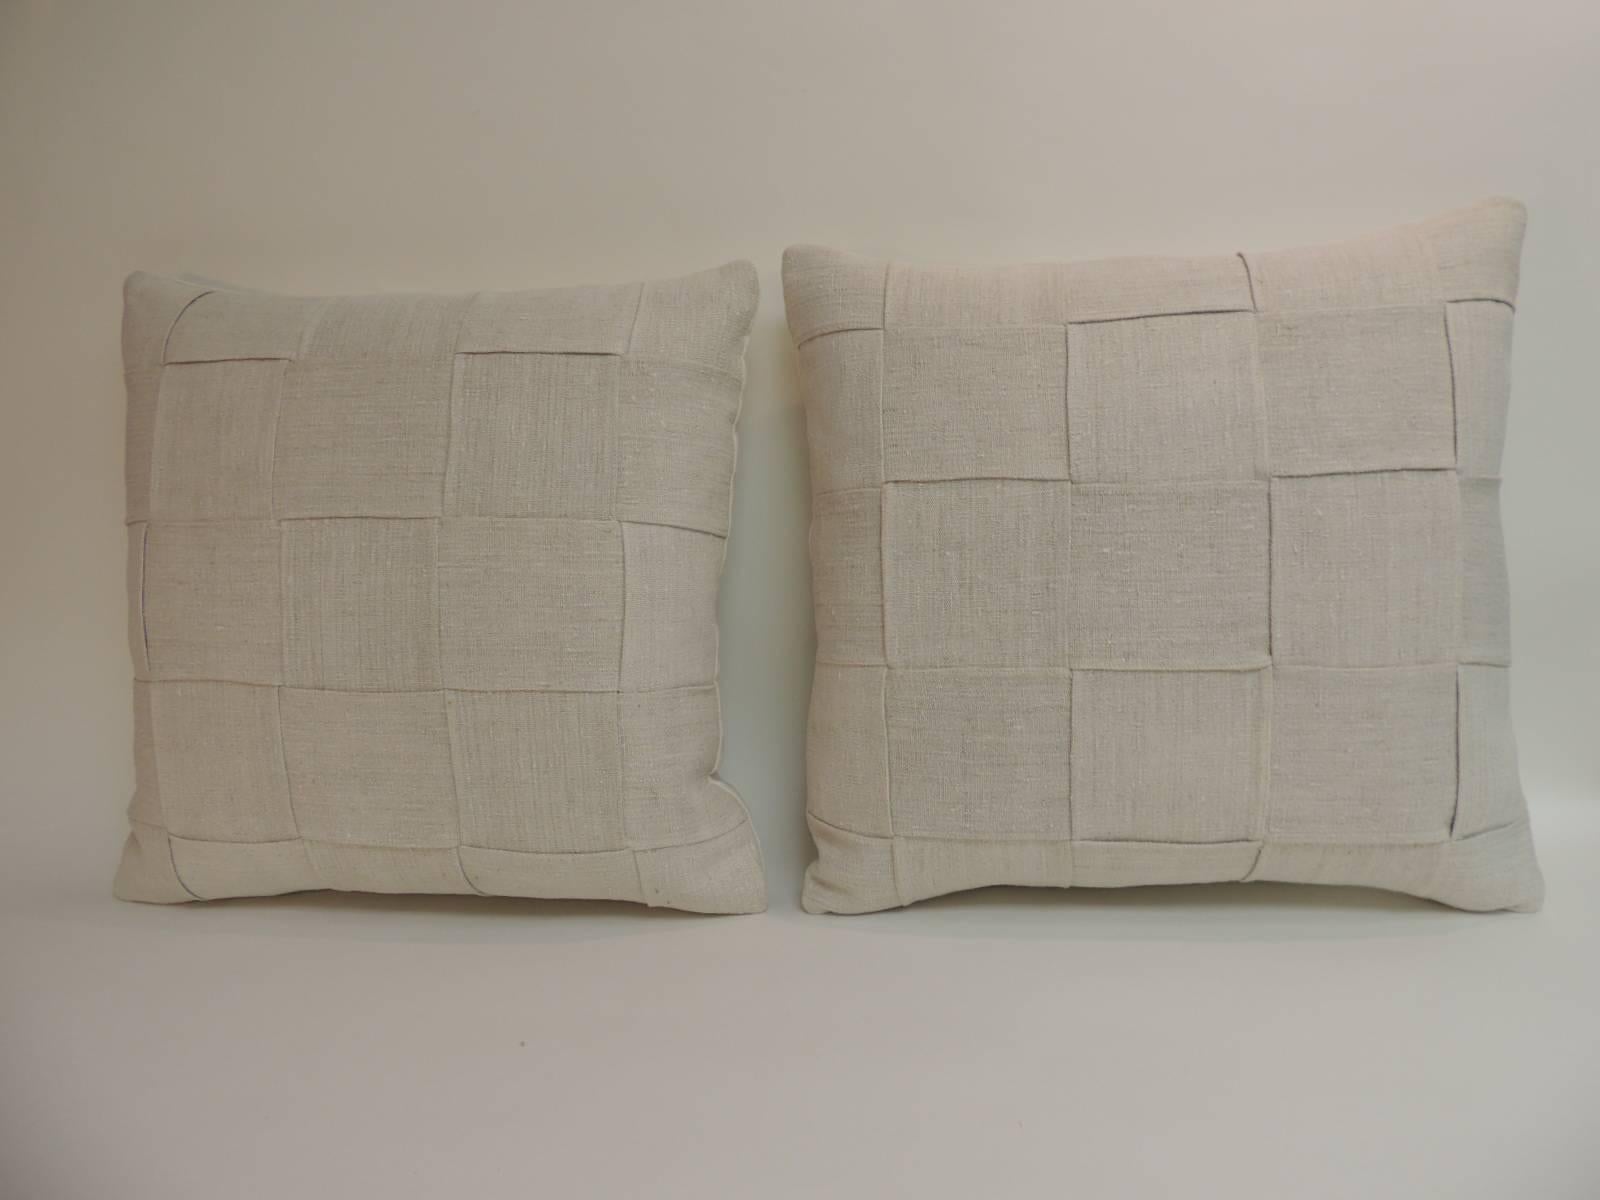 Pair of 19th century homespun French linen pillows
Pair of 19th century homespun French textured linen decorative pillows in oatmeal and natural. Exclusive Atelier Lam basket weave design. 19th century homespun decorative French pillows finished